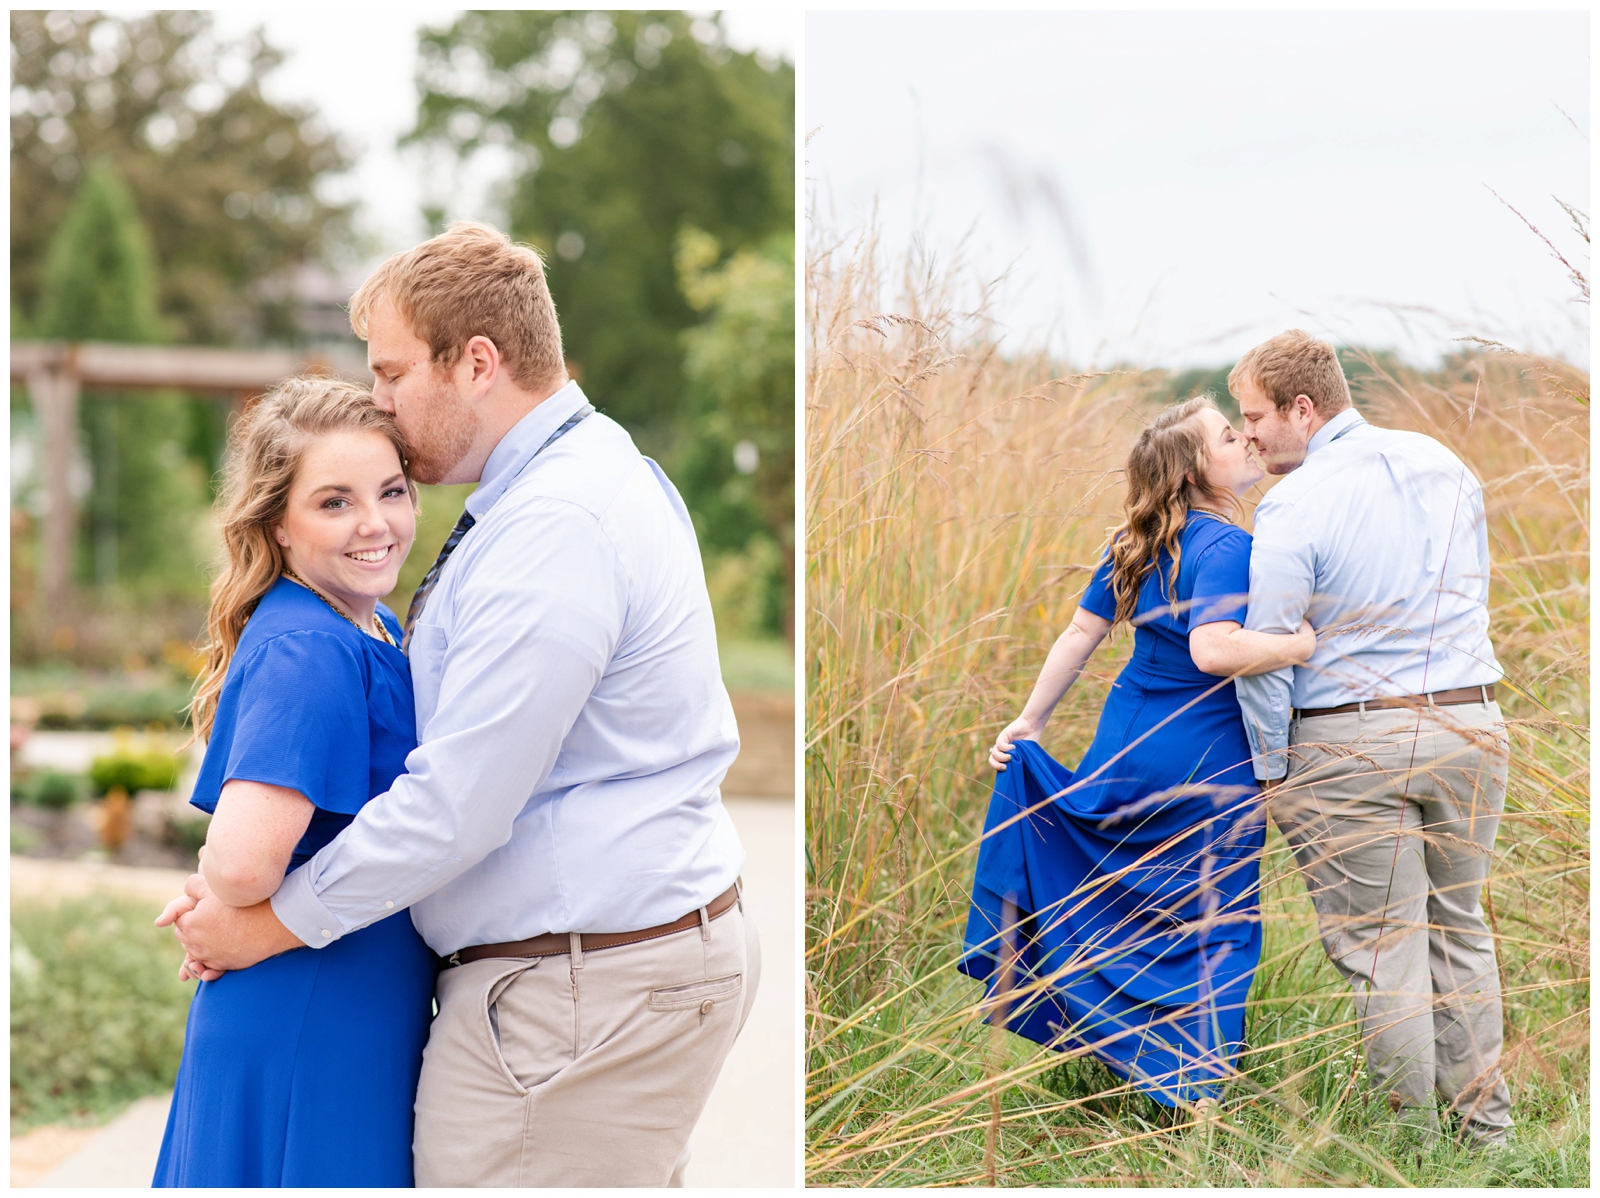 bride in bright blue gown kisses groom in blue shirt and khakis in field at Dawes Arboretum during engagement portraits